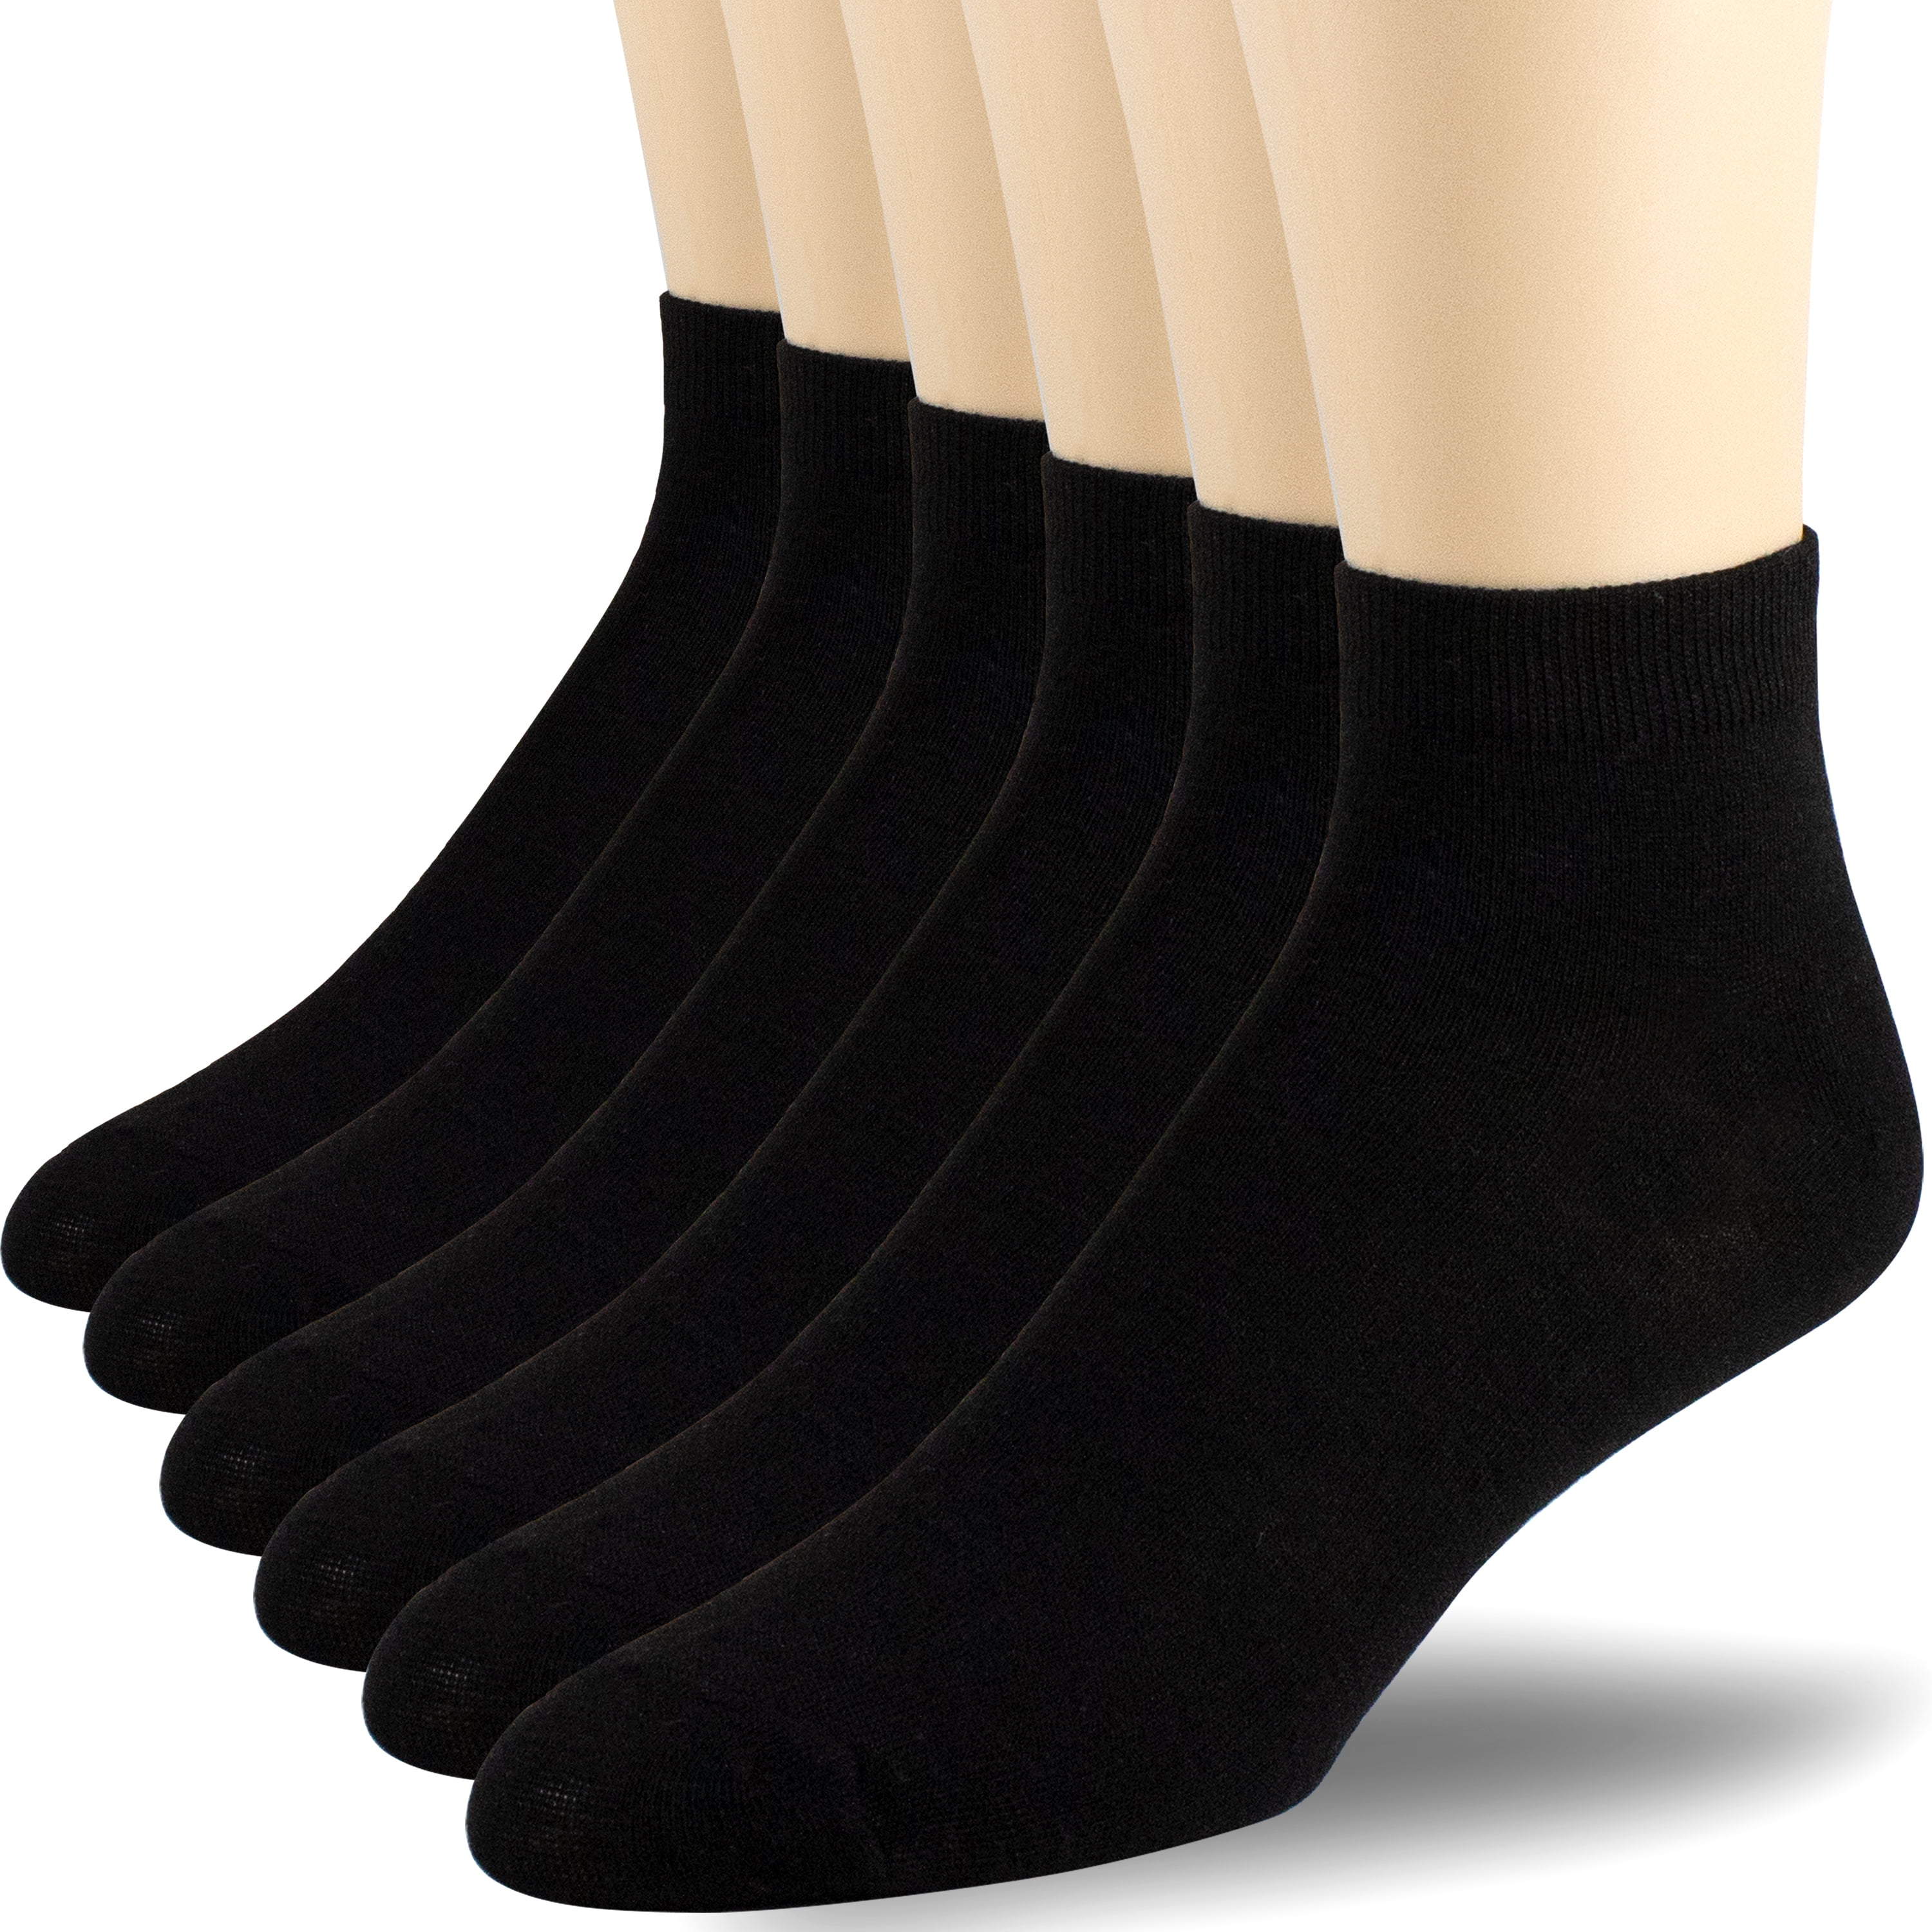 12 Pairs Mens invisible Assorted Socks Trainer Shoe Footsies Liner cotton rich 